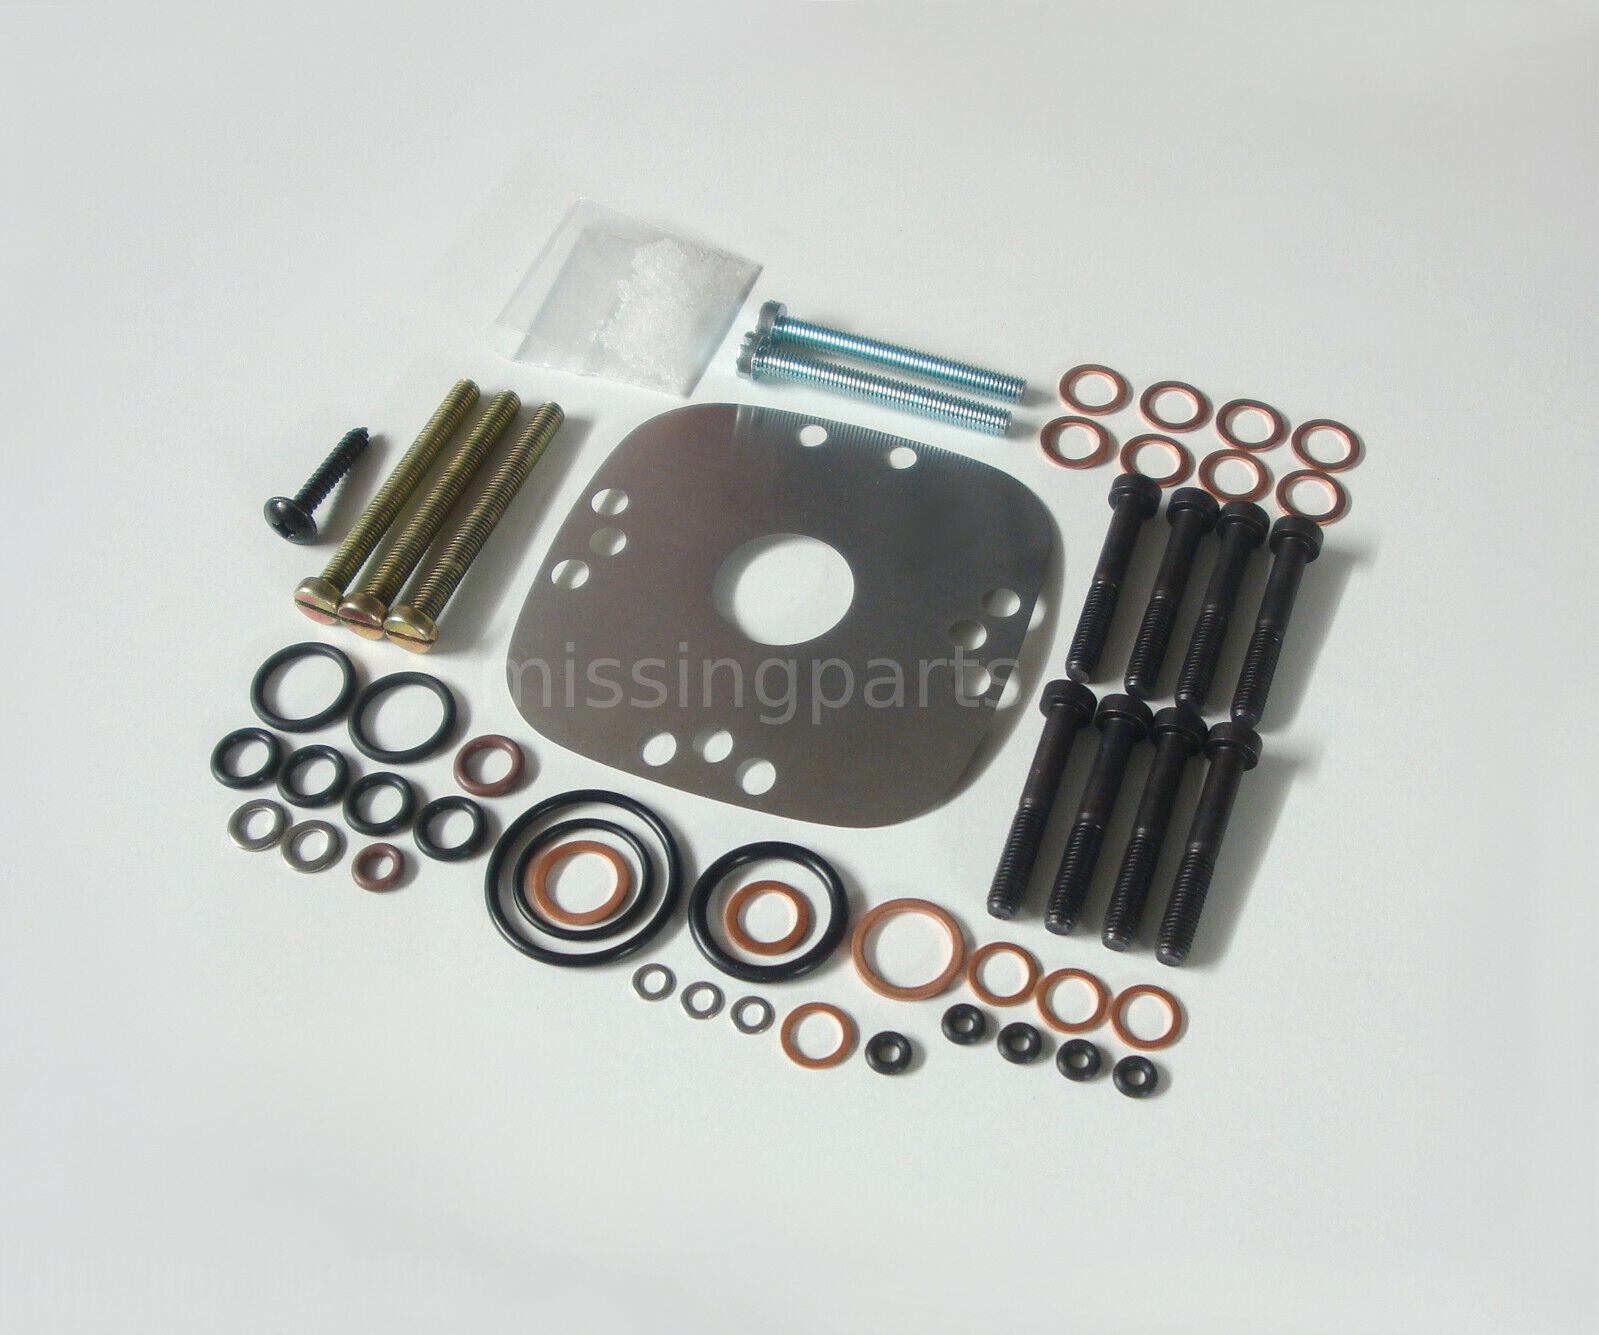 Fuel distributor Repair Kit for All Bosch 4 Cyl Gray Cast Iron